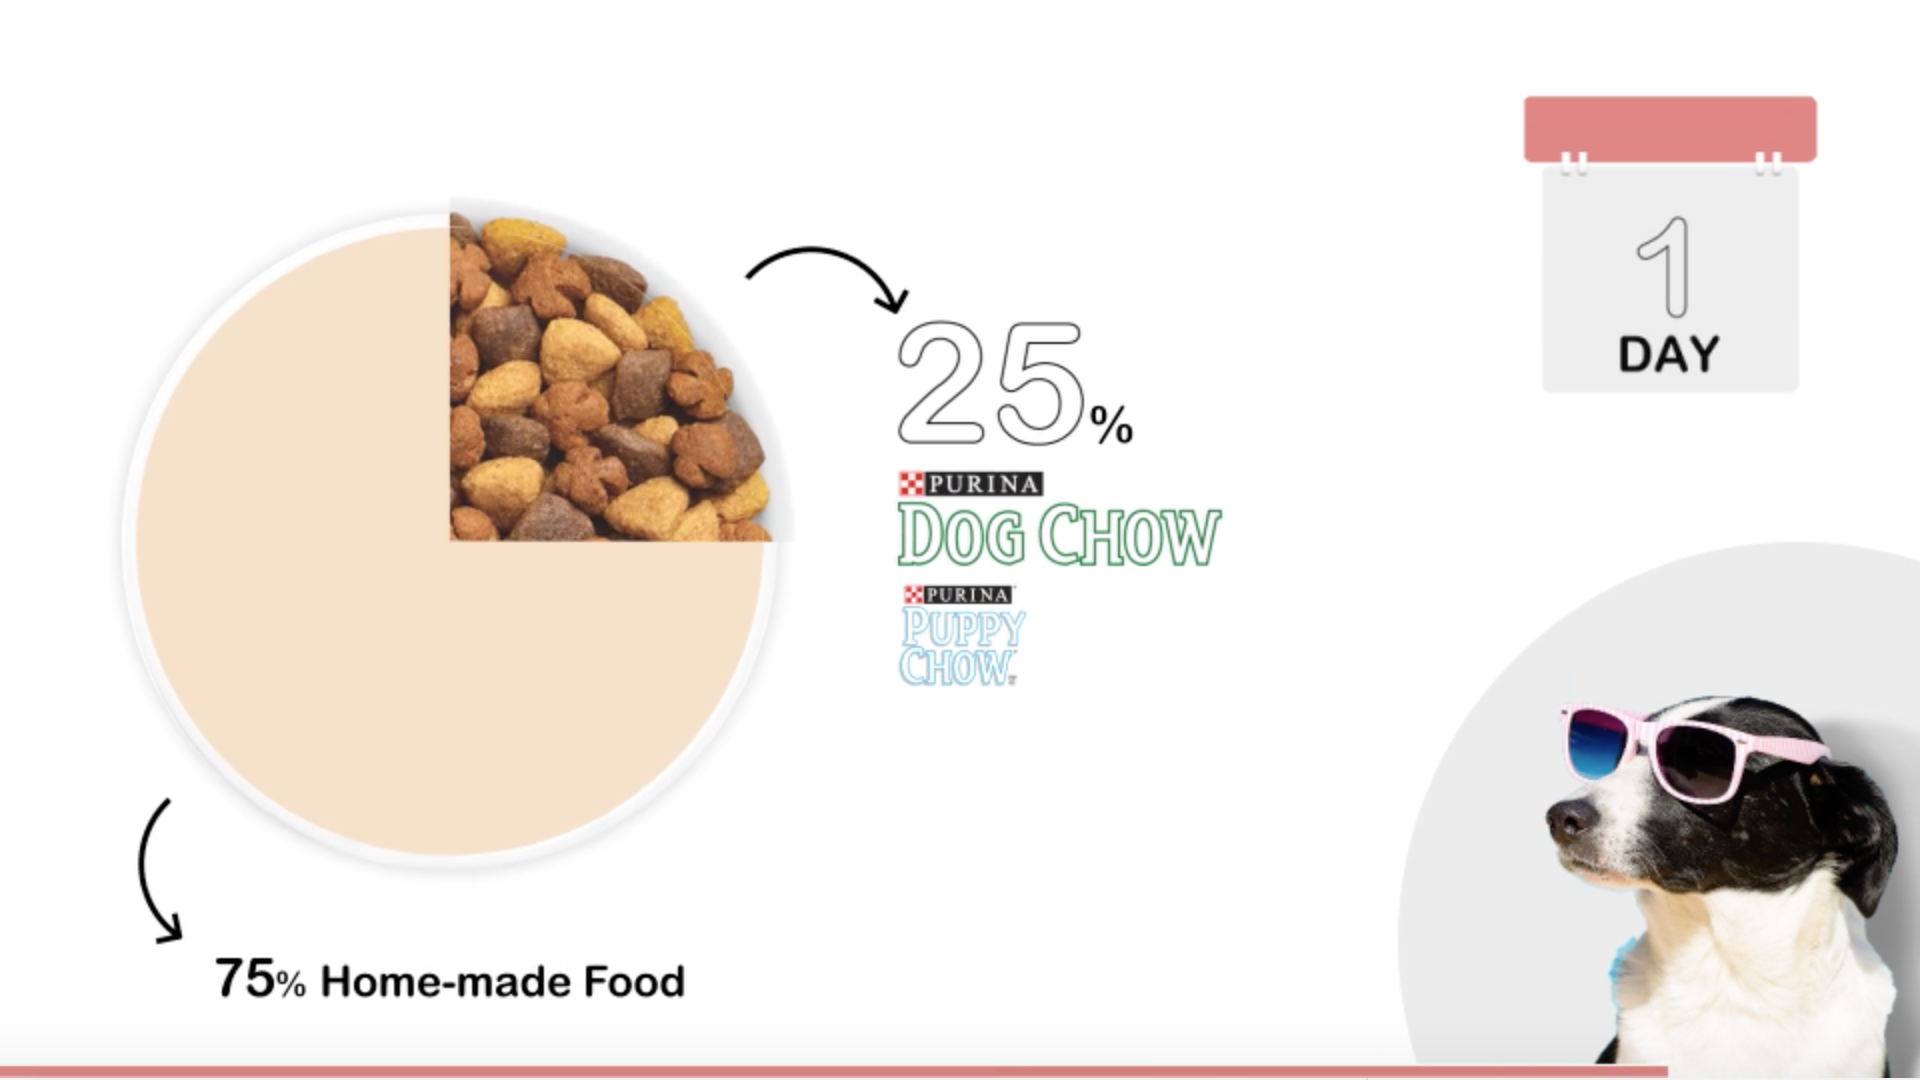 Purina: Explainer Video (How To Switch To Dog Chow)